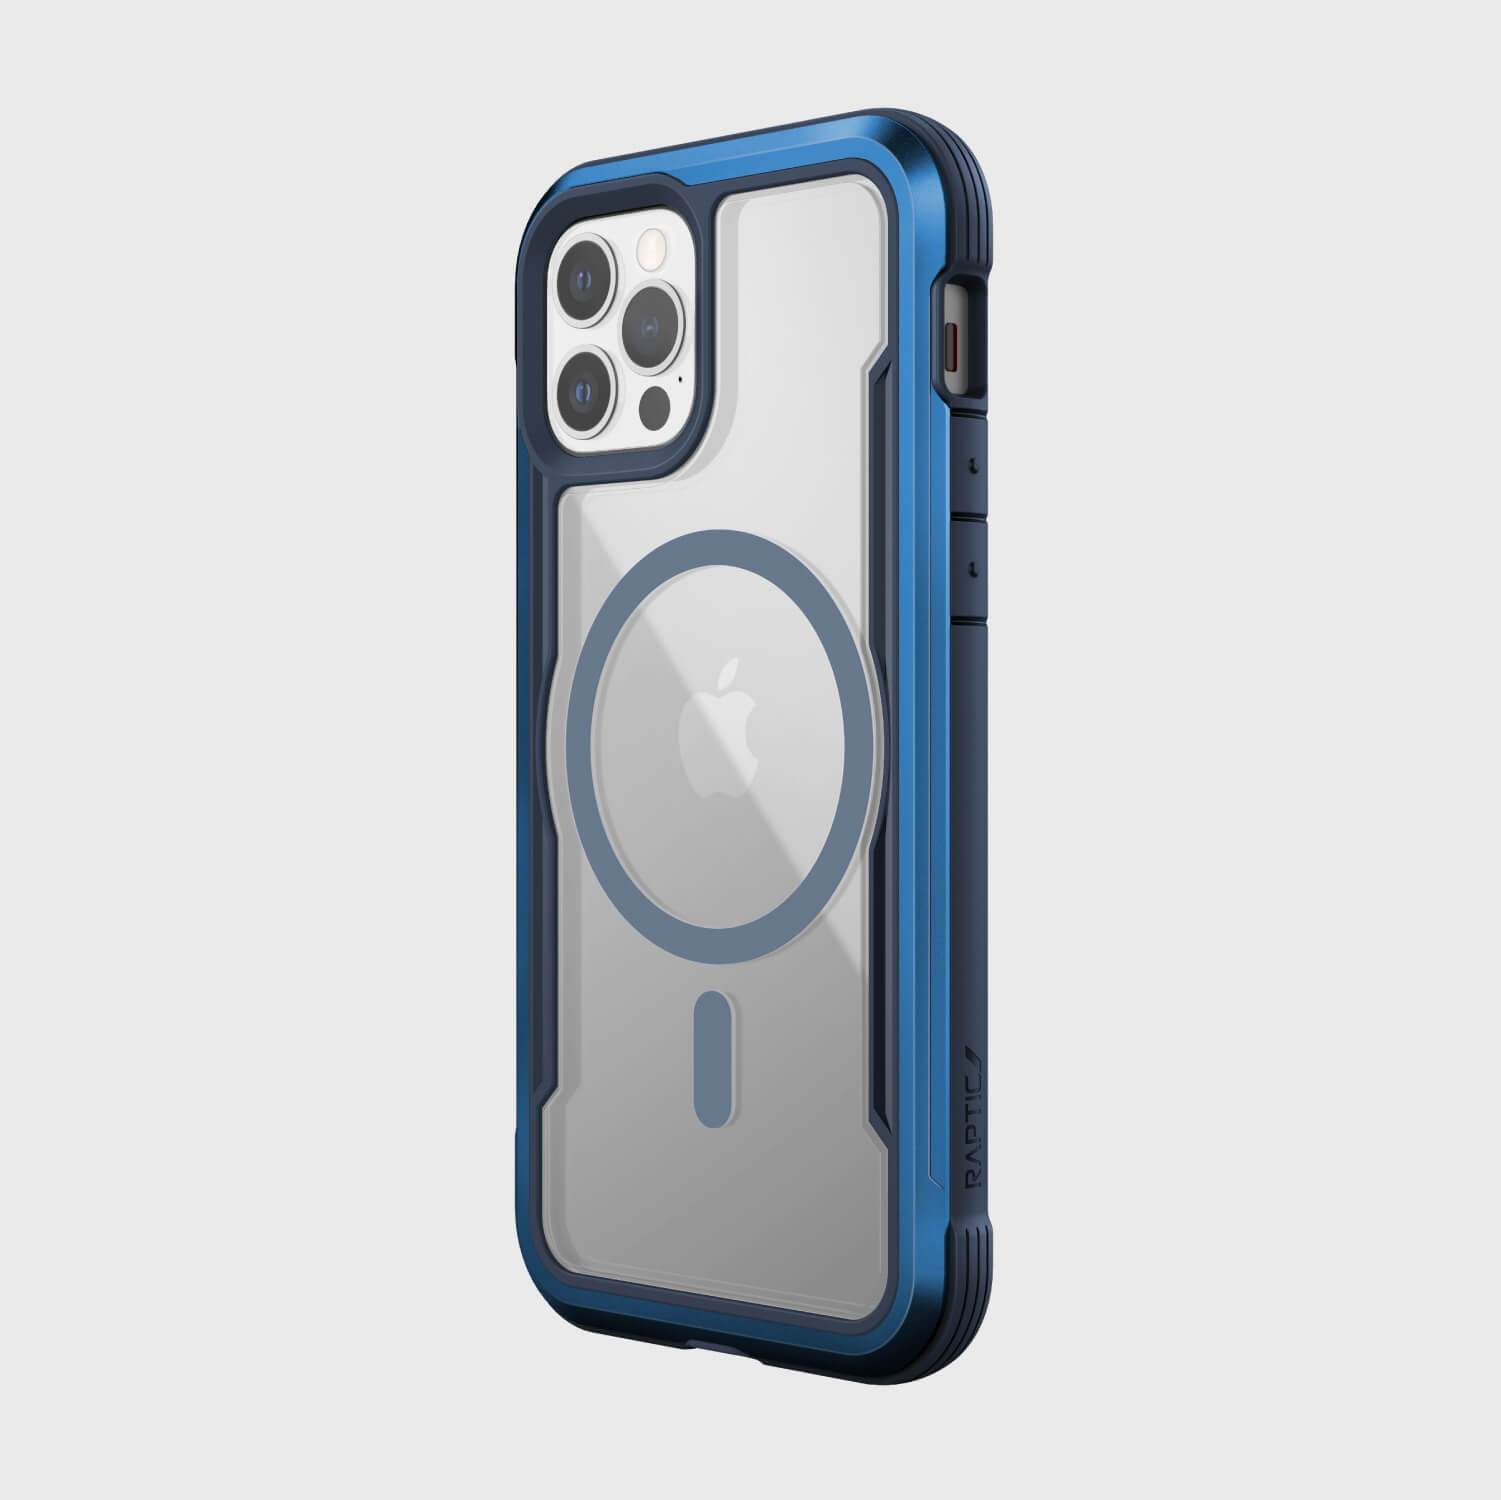 The iPhone 12 Pro Max case - SHIELD PRO MAGNET, compatible with MagSafe chargers, is shown in blue. (Brand: Raptic)